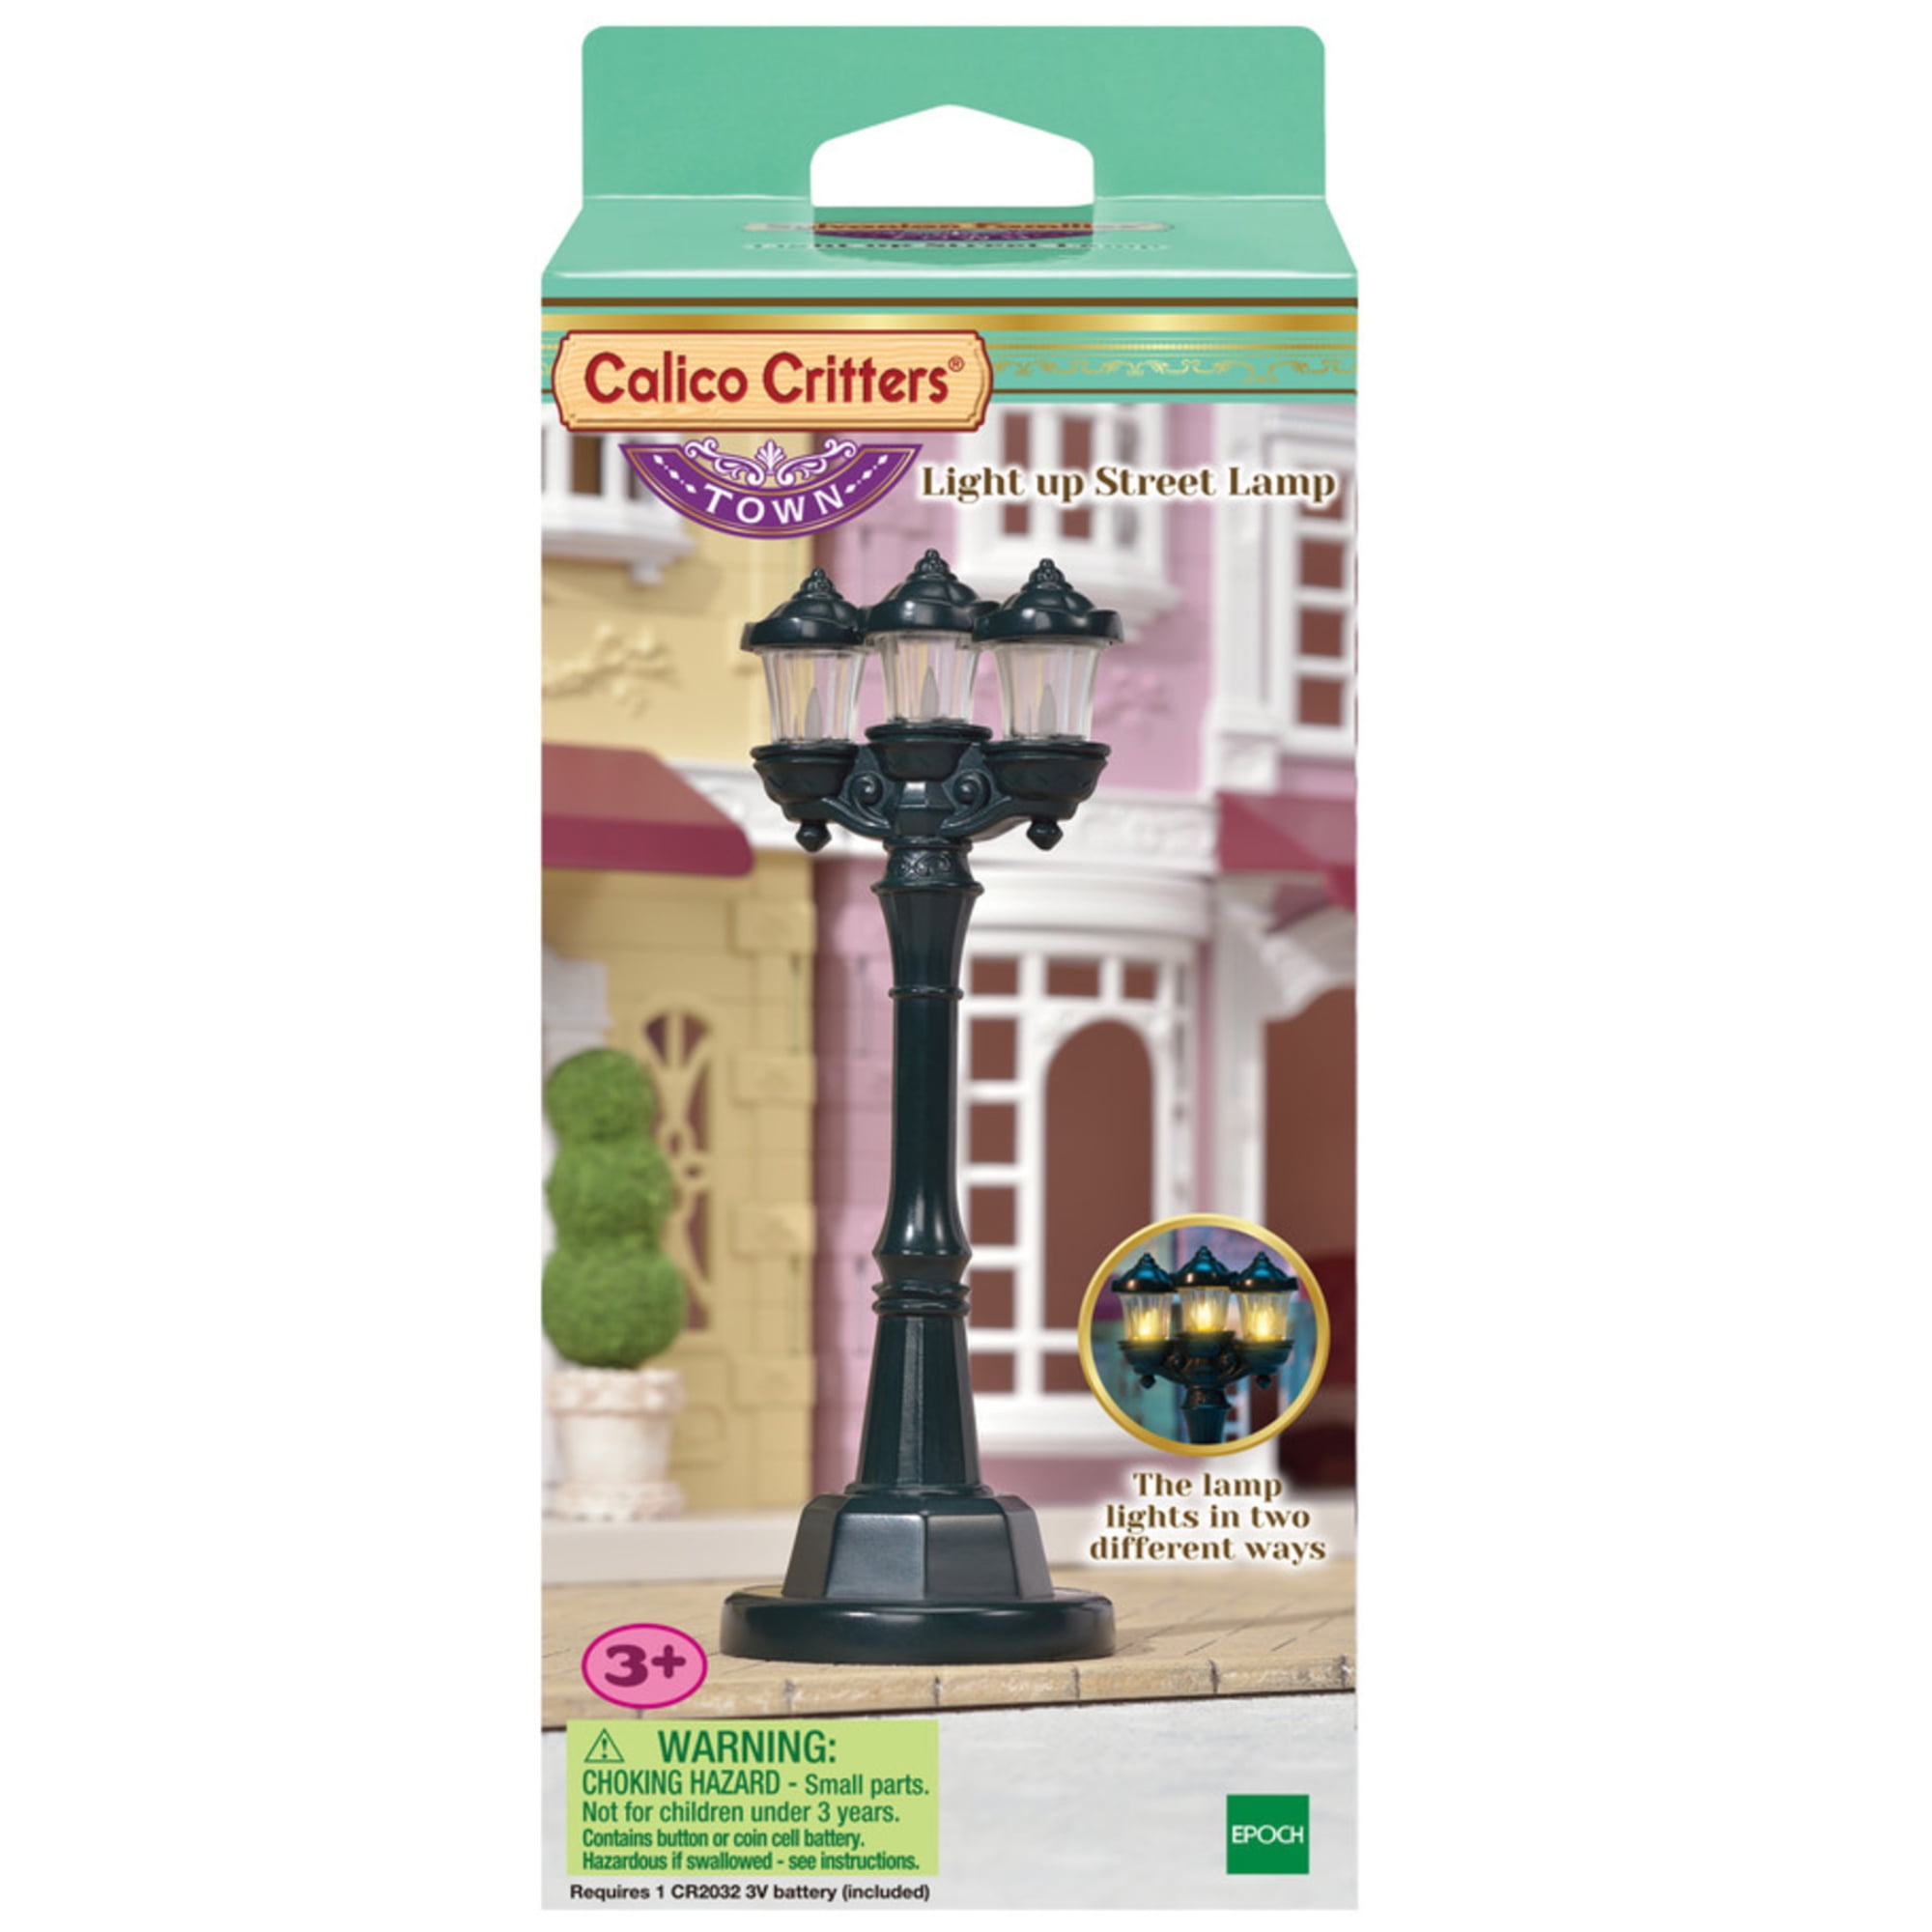 Calico Critters Light Up Street Lamp Town Series 